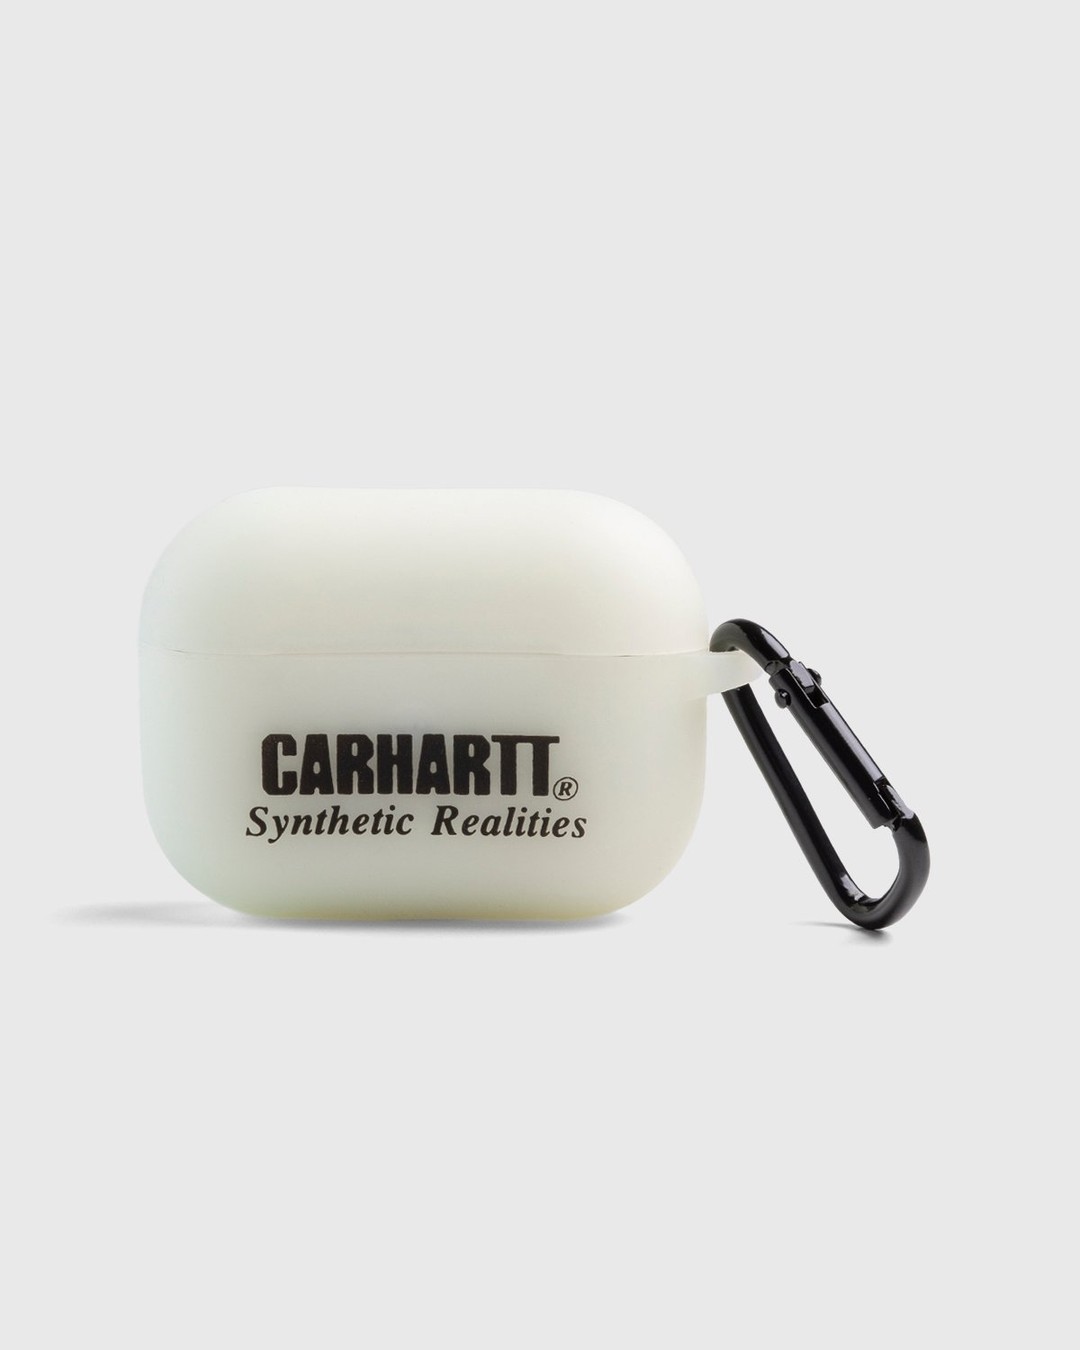 Carhartt WIP – Synthetic Realities AirPods Case Glow In The Dark Black - Air Pod Cases - White - Image 1